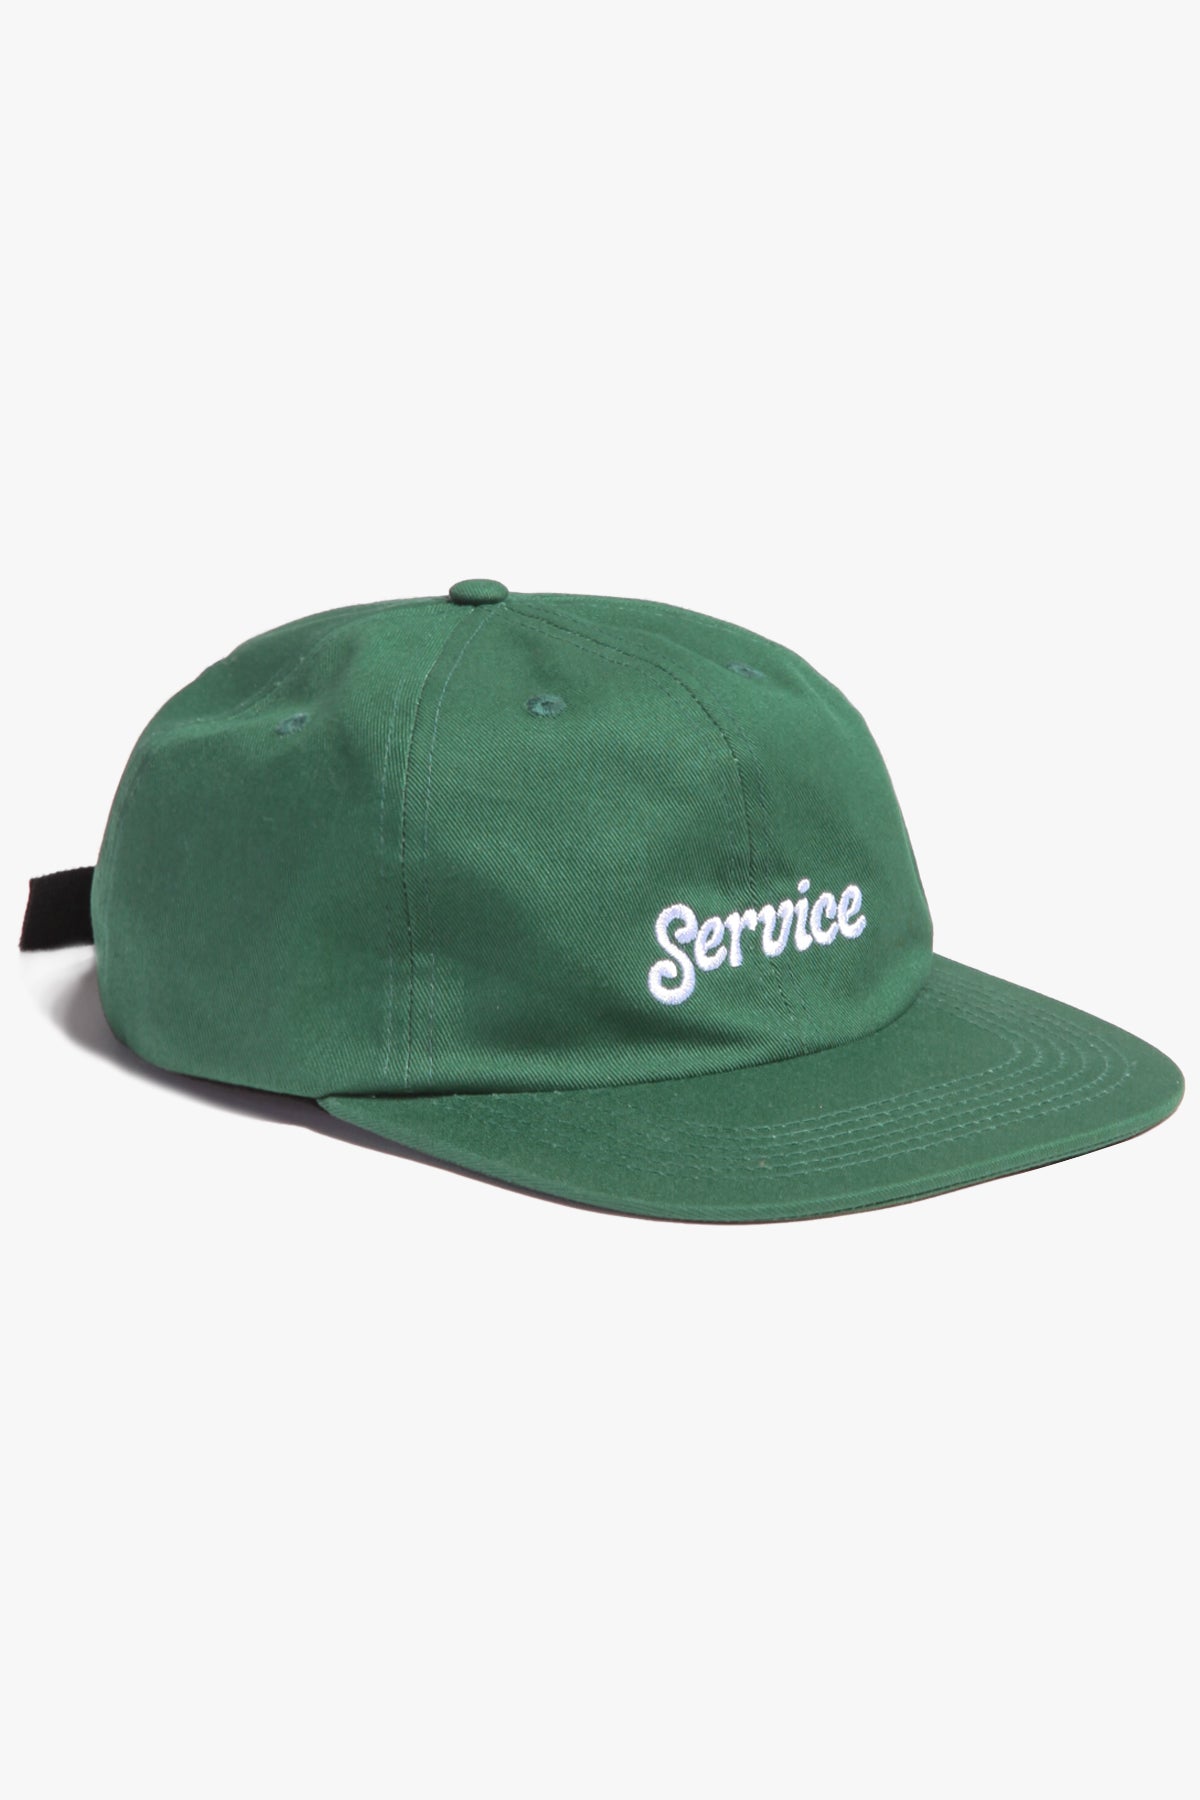 Service Works - Service Cap - Forest